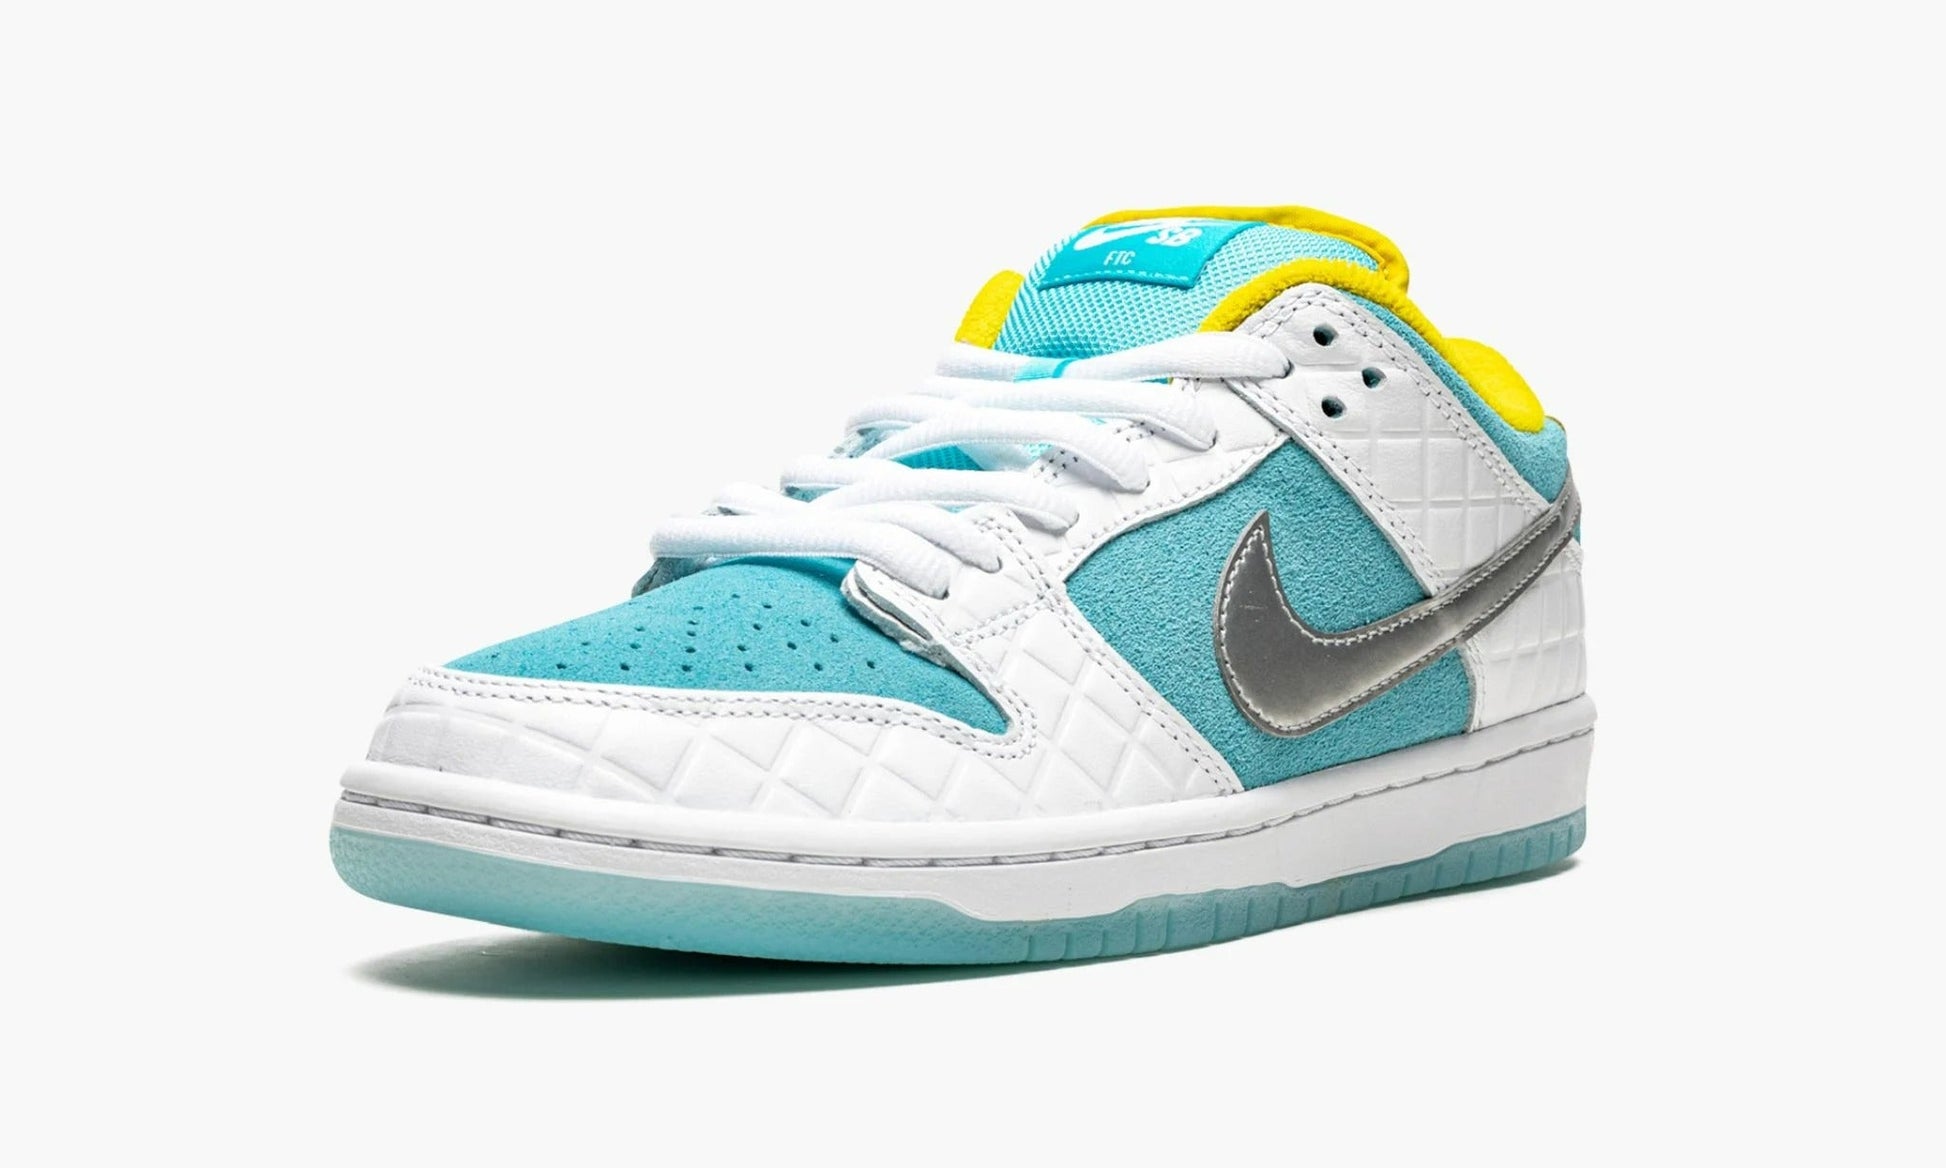 Dunk SB Low FTC Lagoon Pulse - DH7687 400 | The Sortage